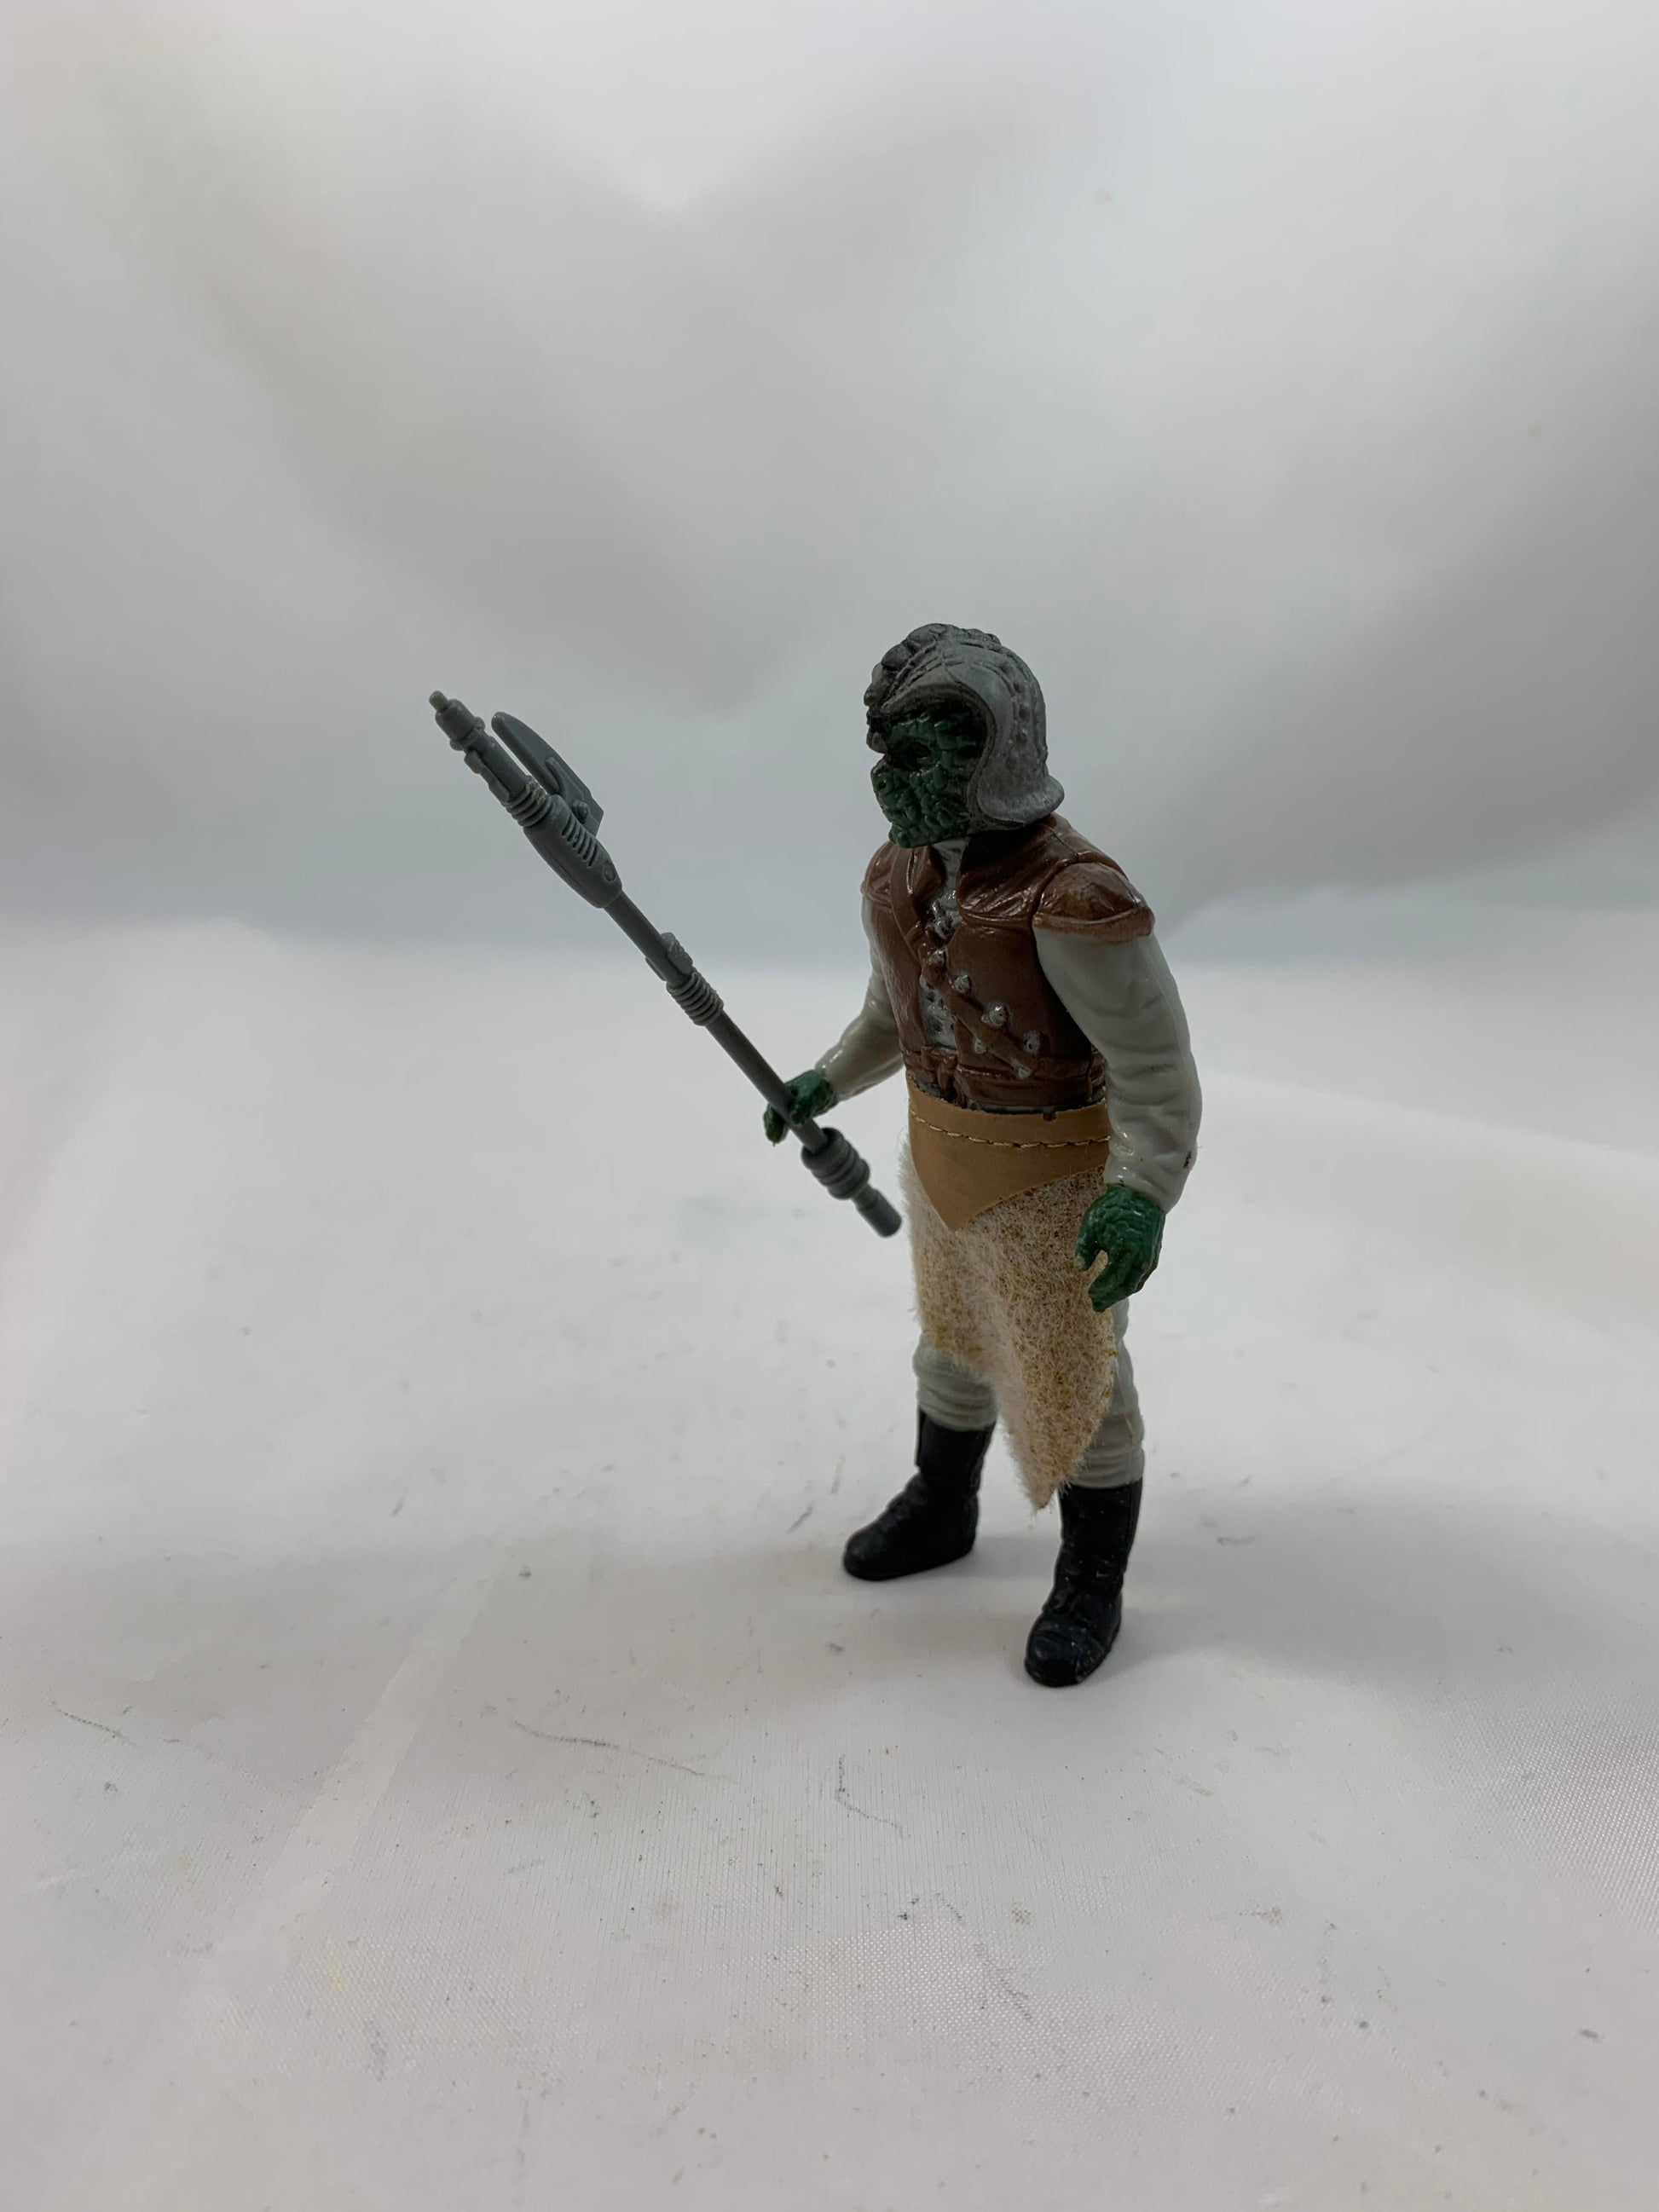 Kenner Vintage Star Wars Klaato 100% Complete and with original weapon COO LFL 83 H.K. - Loose